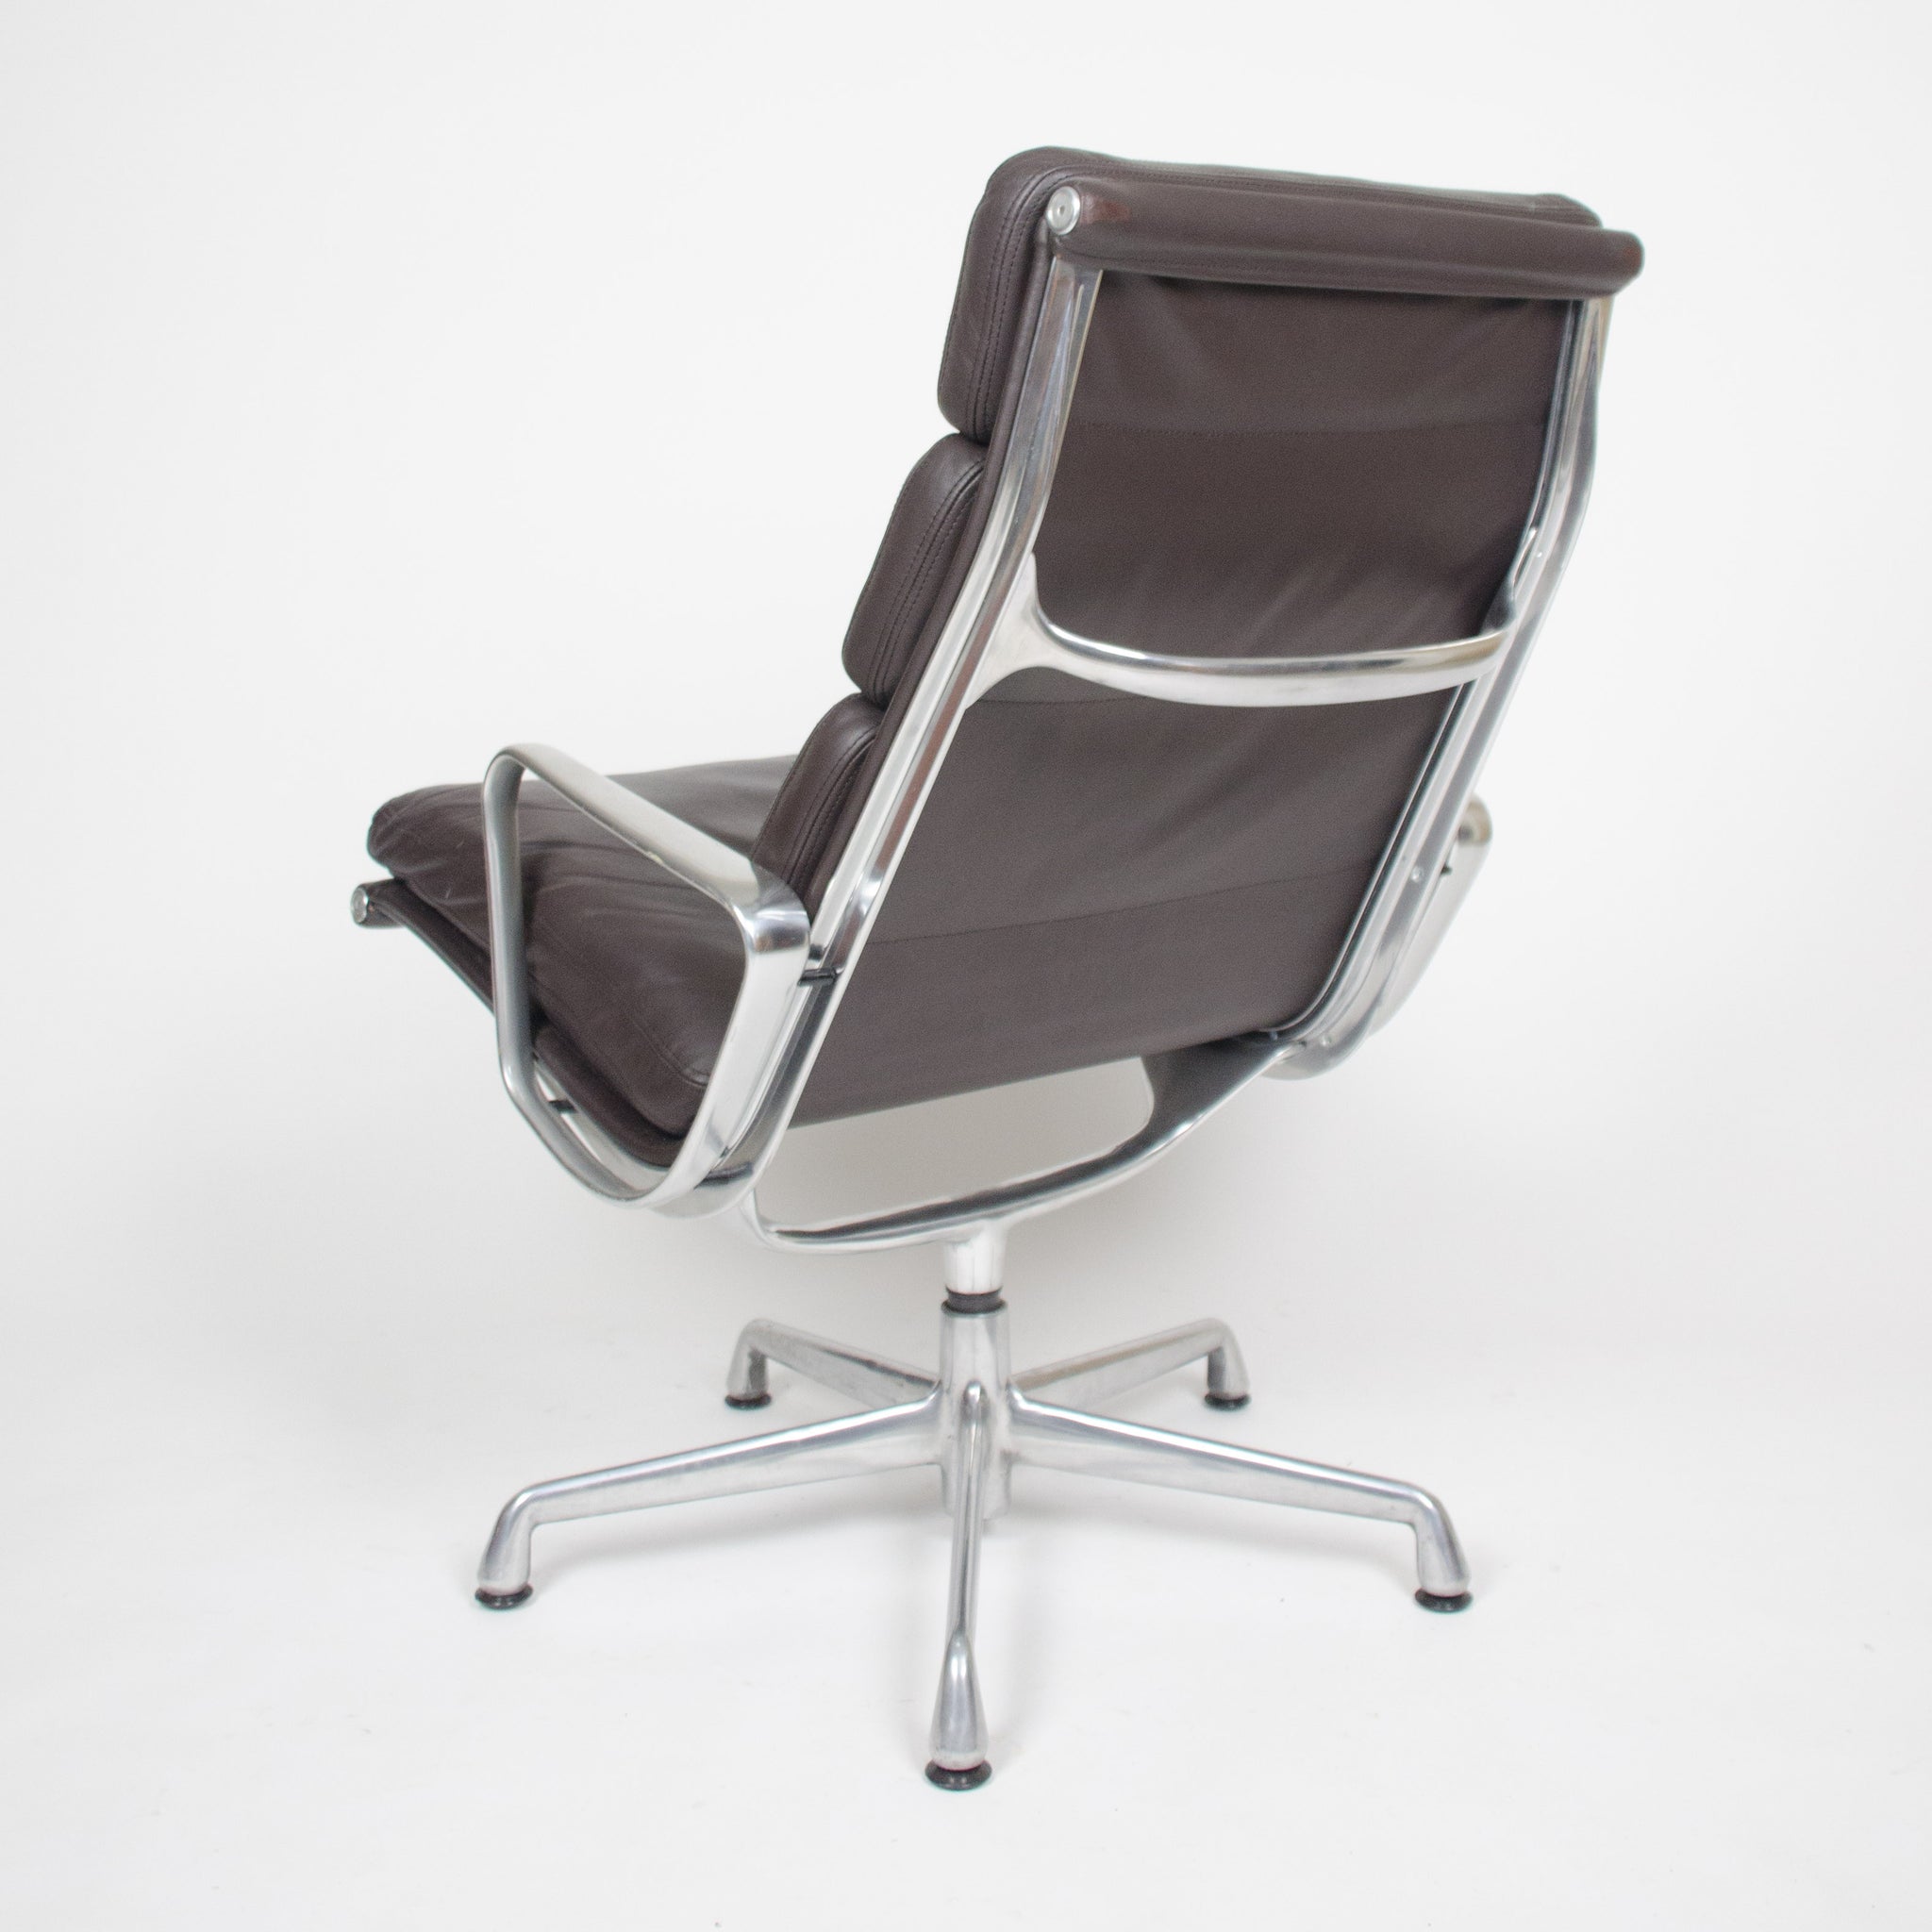 SOLD Eames Herman Miller Soft Pad Aluminum Group Lounge Chair Brown Leather